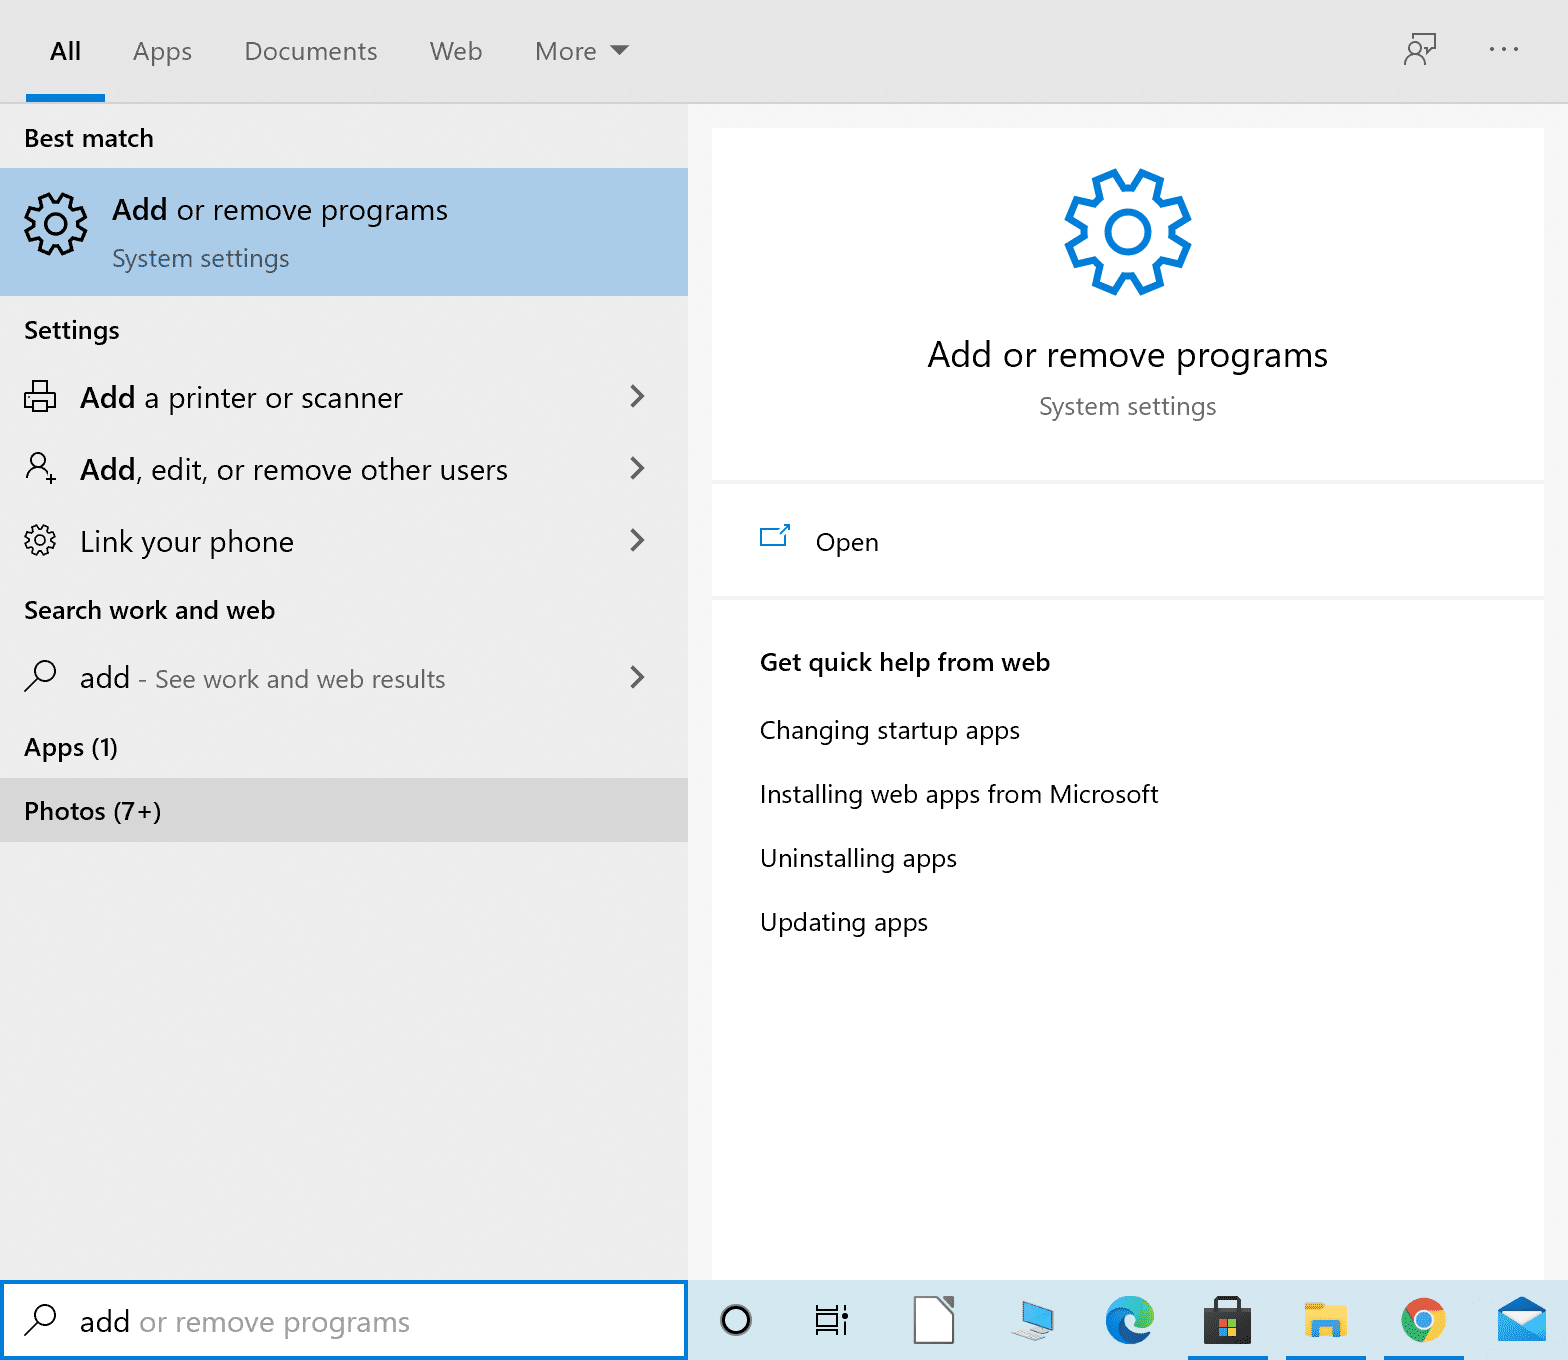 Type Add or remove programs in the Windows search bar